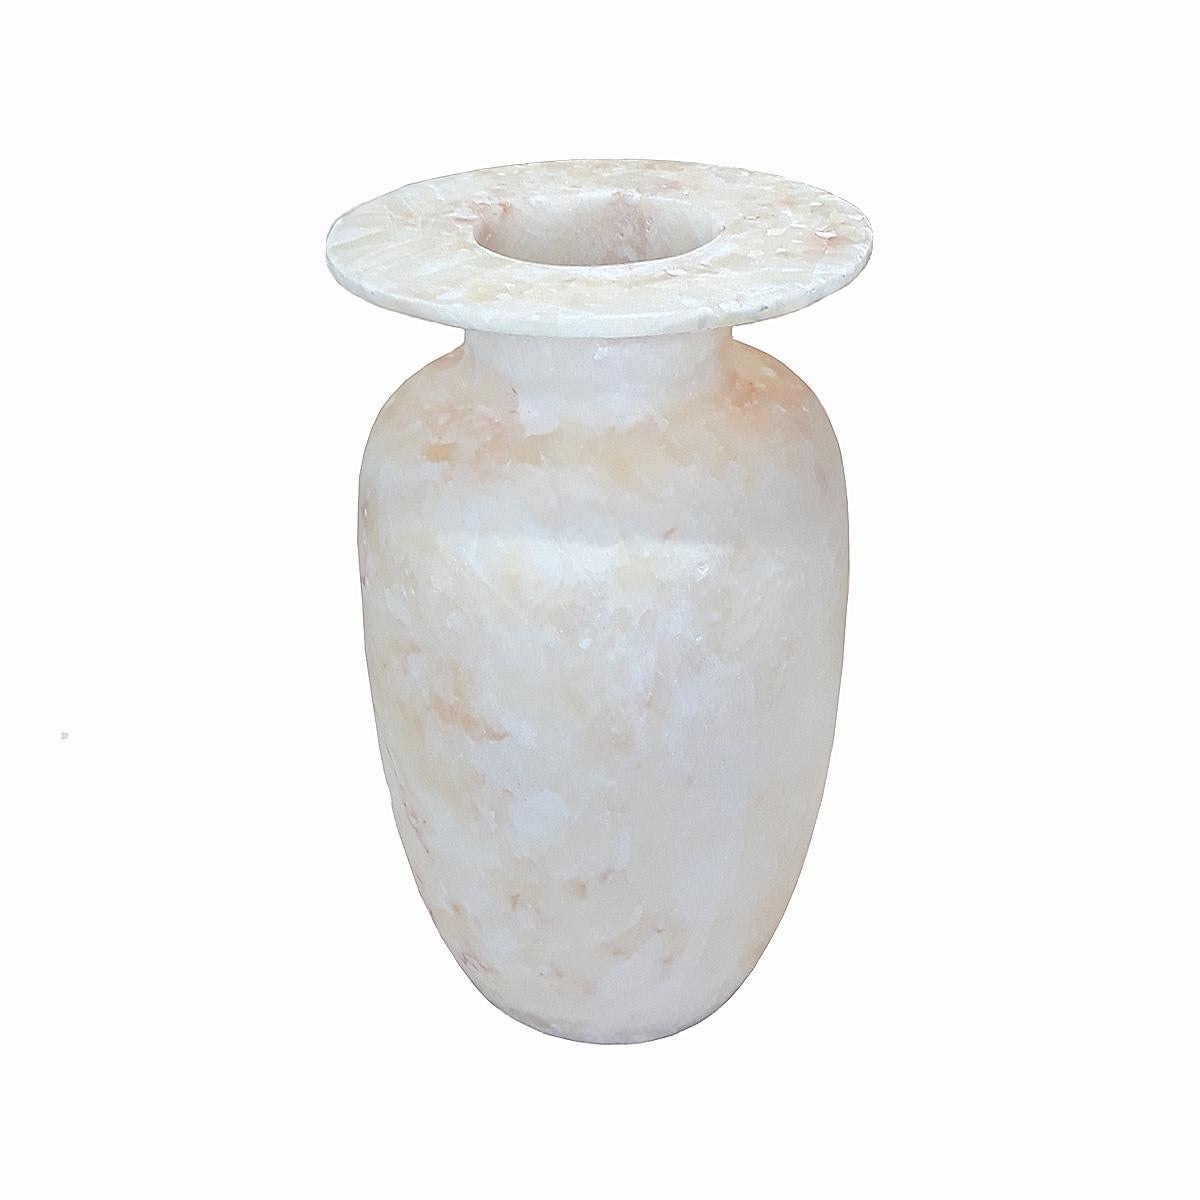 A decorative alabaster vase, hand-crafted in Luxor, Egypt. Single-disk top, narrow top opening. Measures: 15 inches high, 9 inches diameter. 

